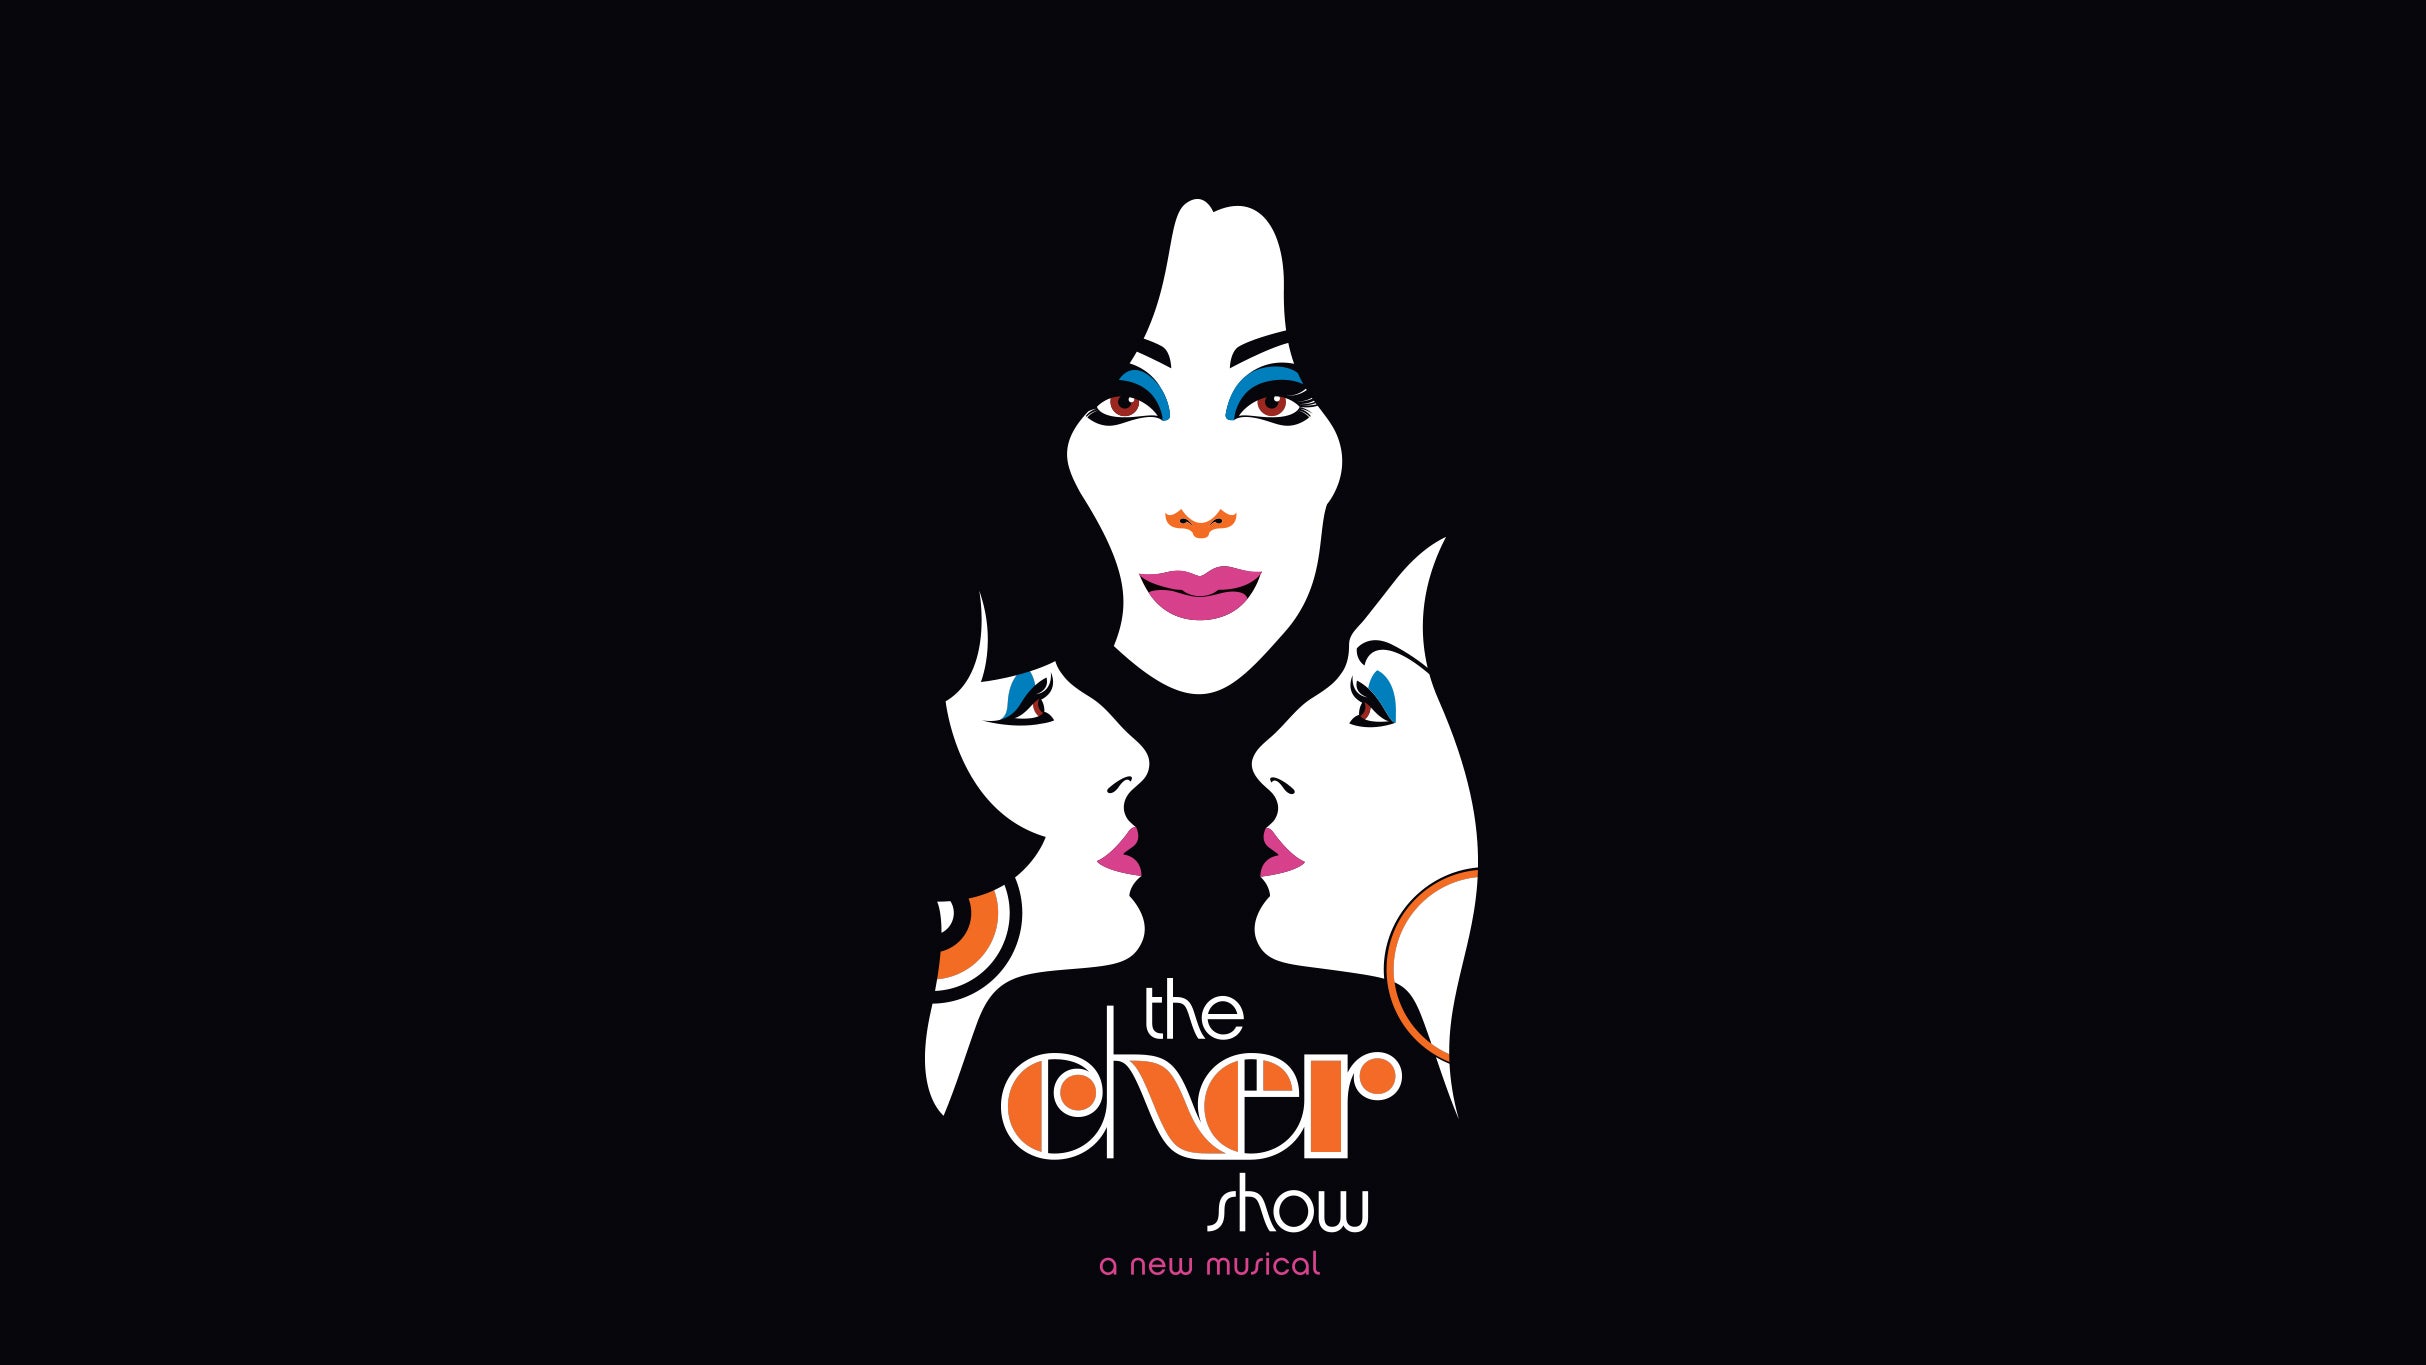 Broadway in Thousand Oaks presents The Cher Show